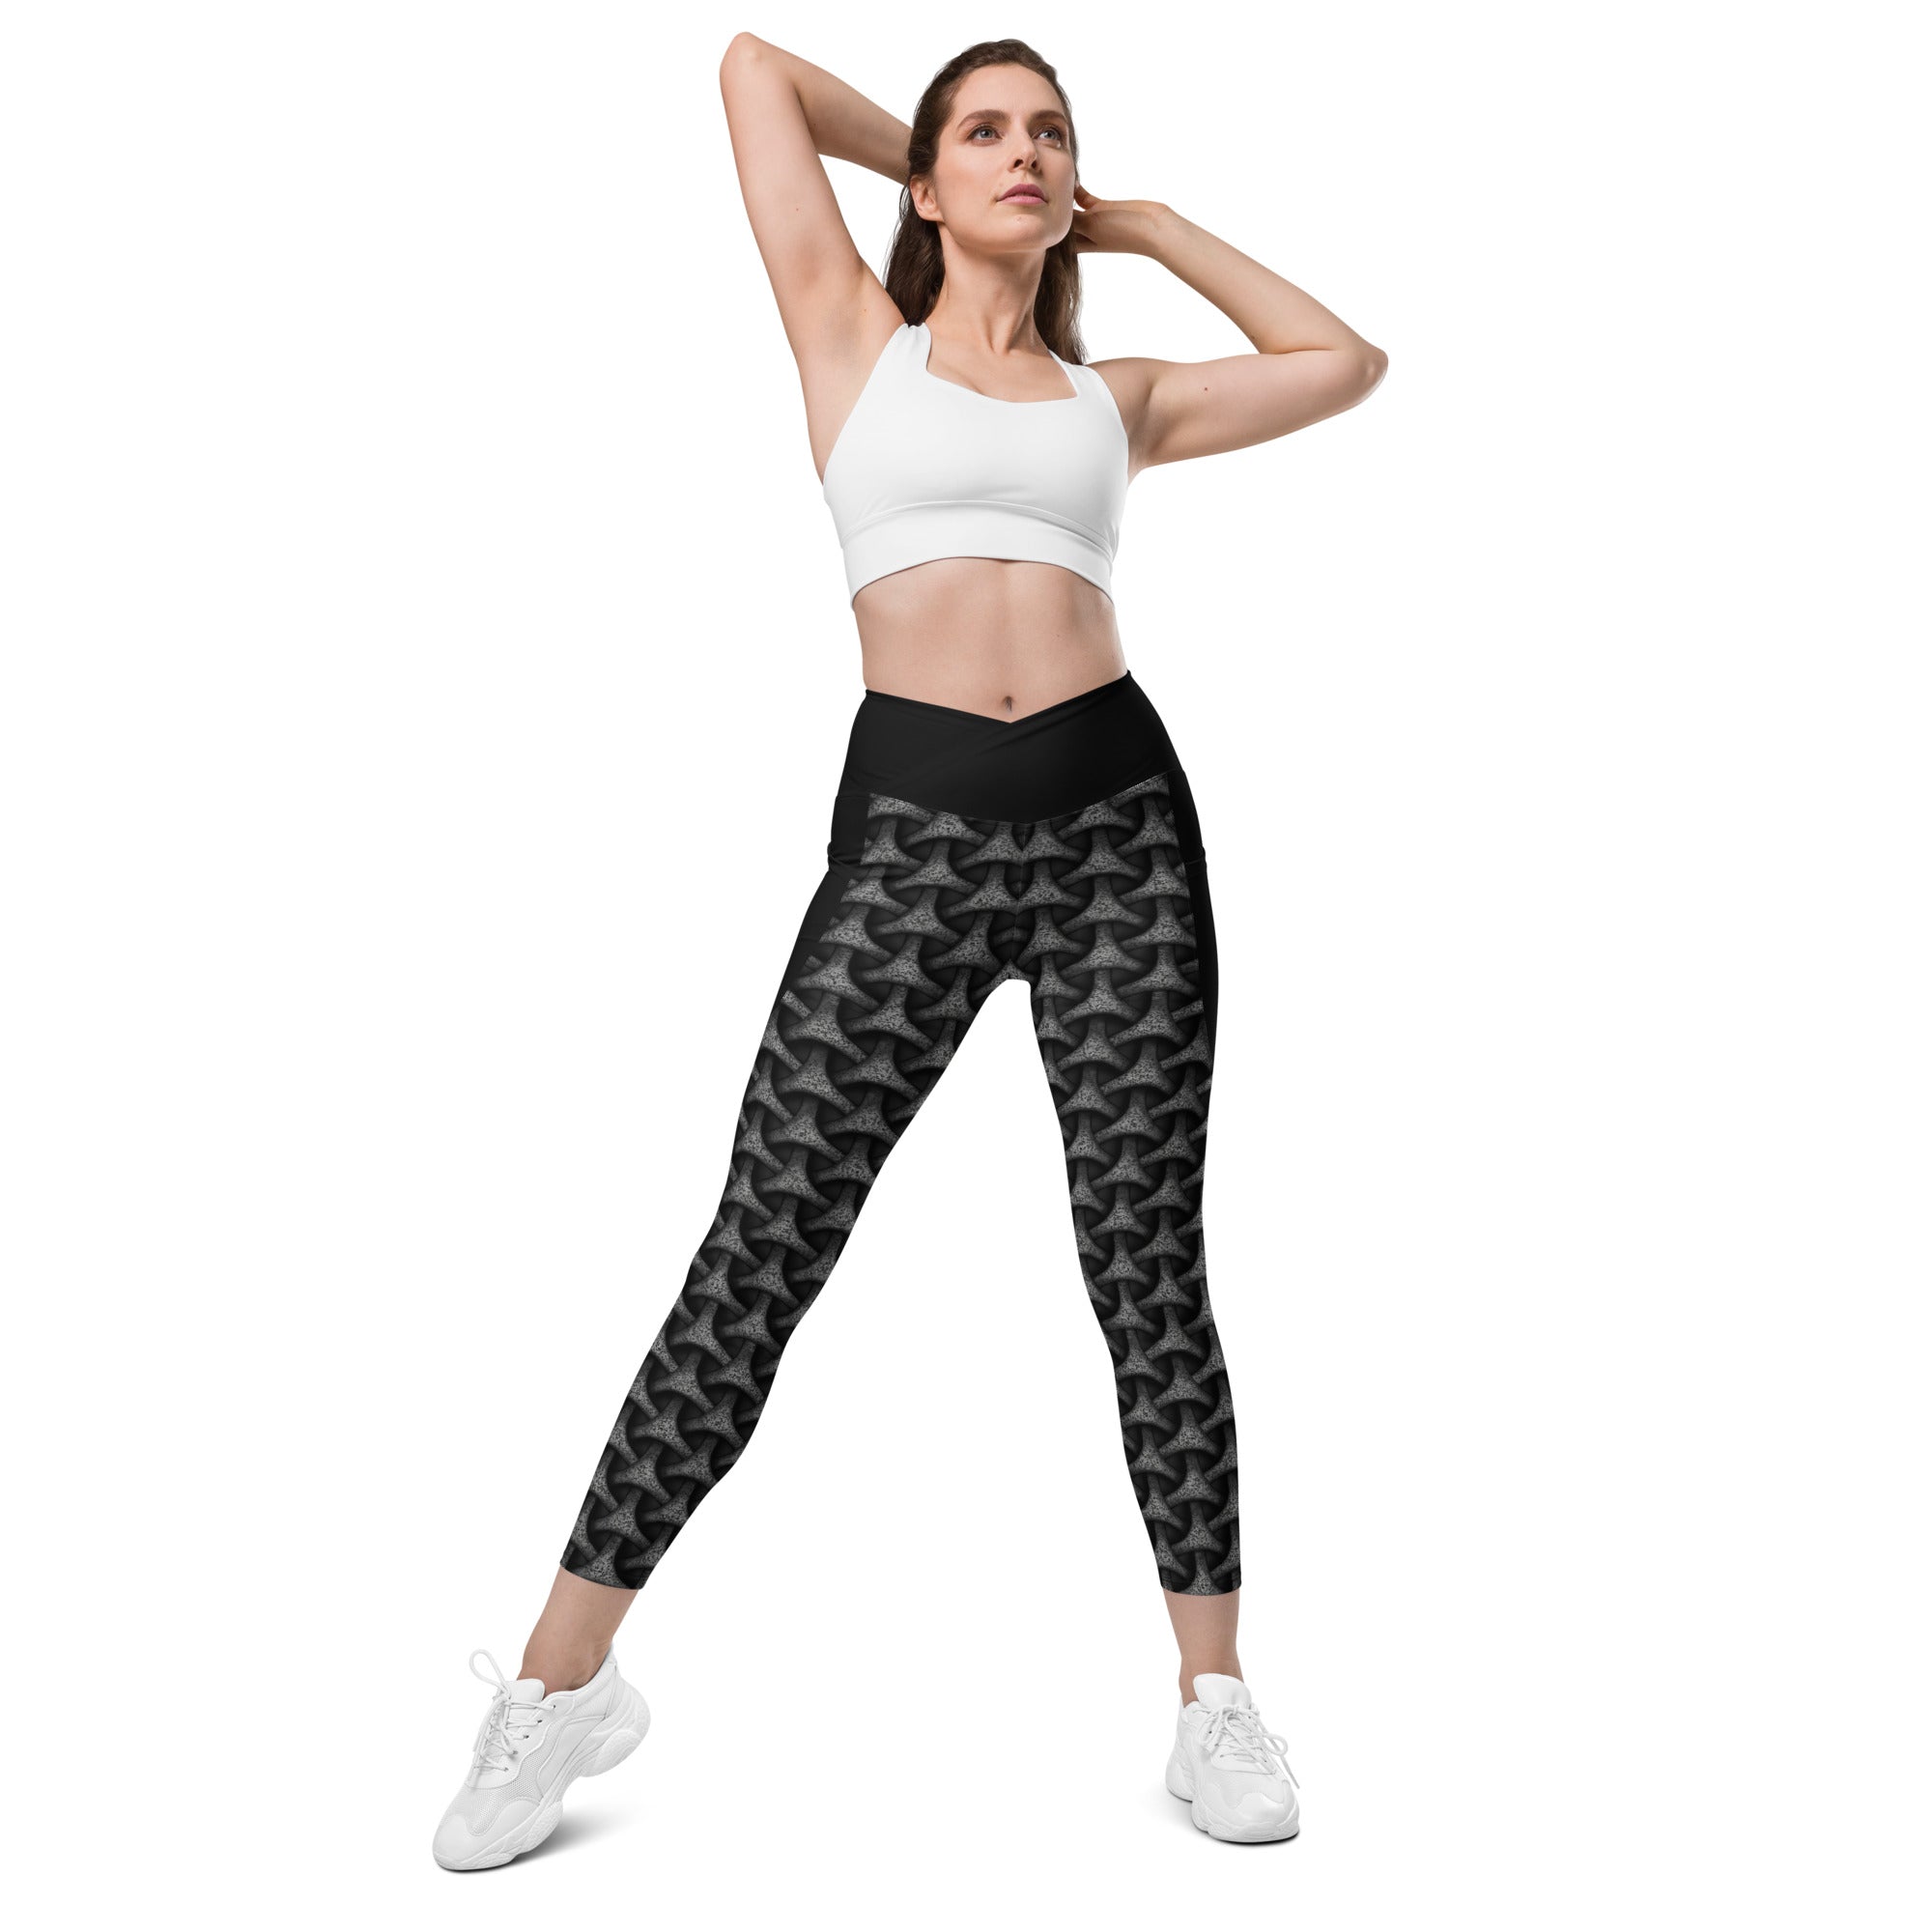 The unique crossover waistband of Nebula Dream Leggings enhancing comfort and style.